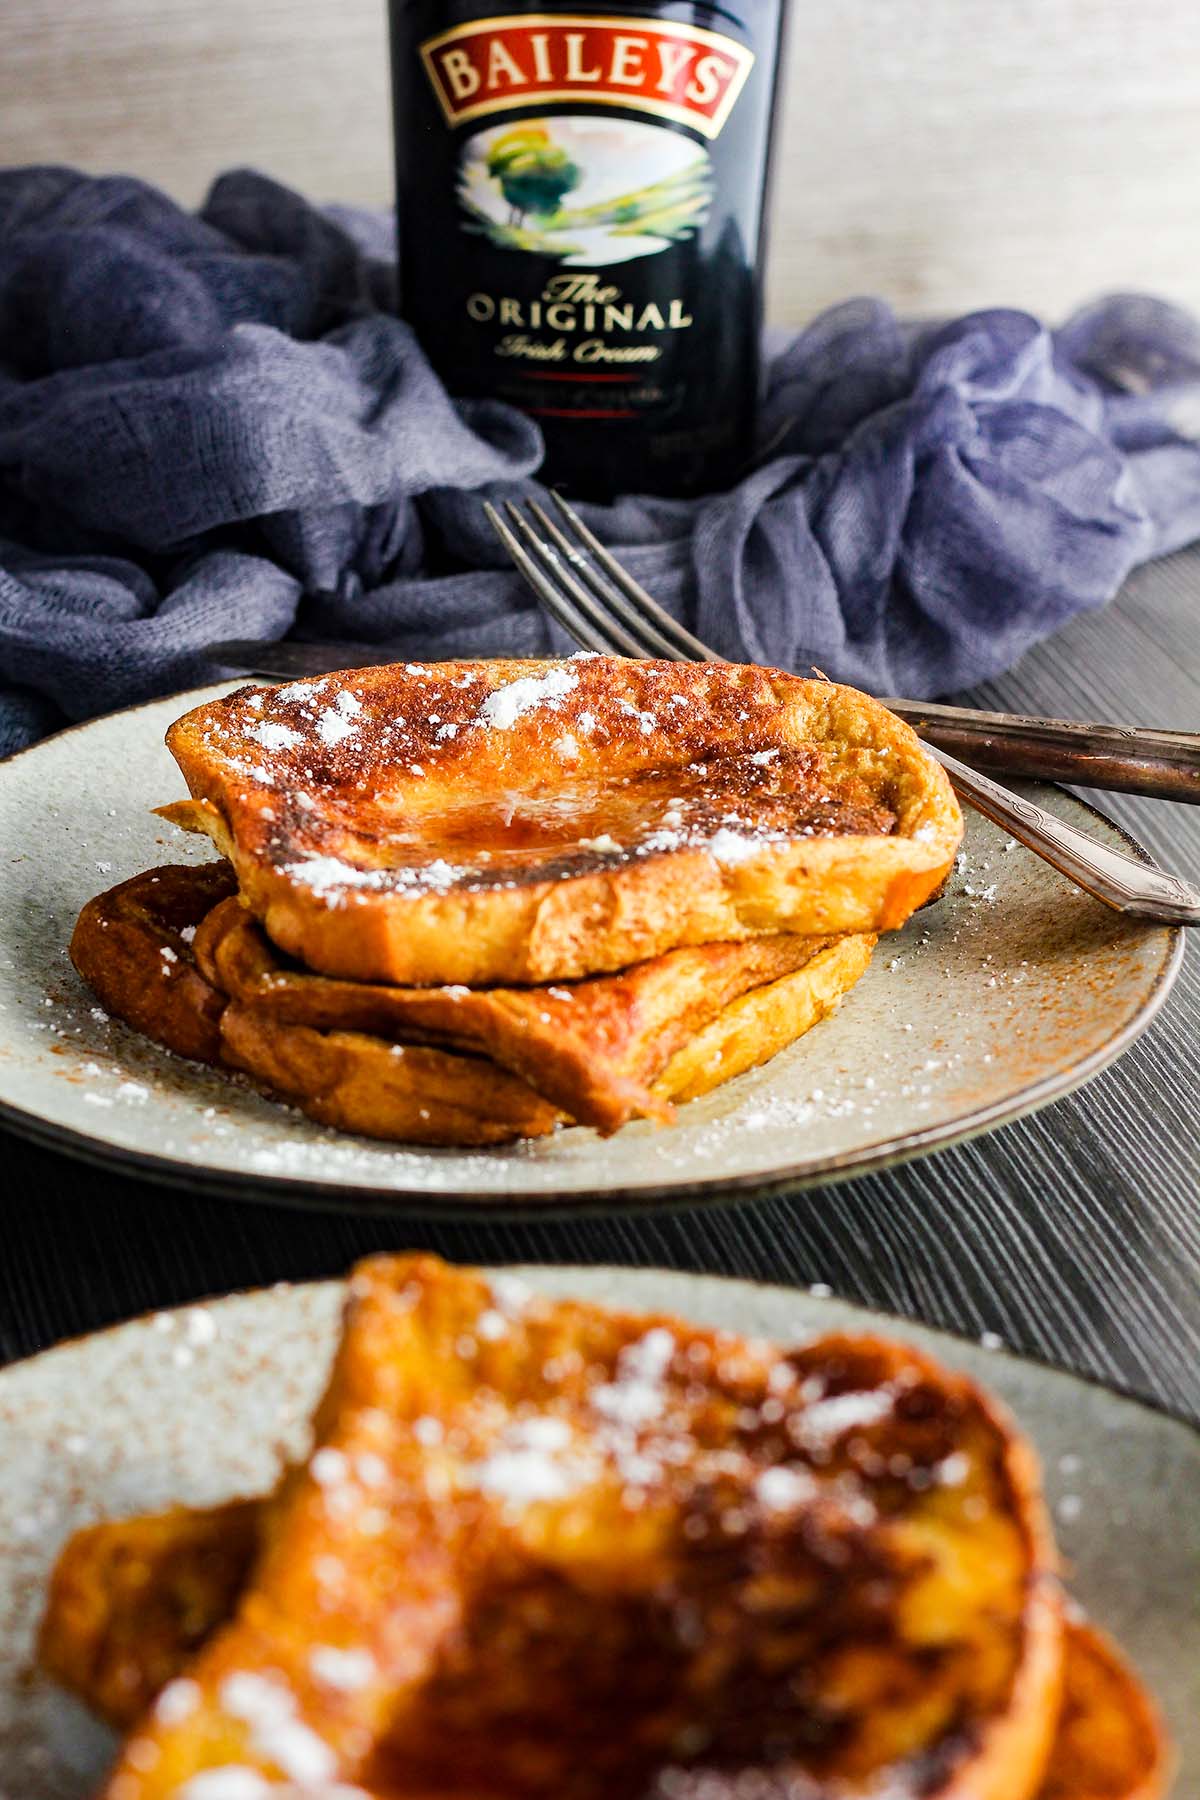 A plate of French toast with a bottle of Baileys in the background.